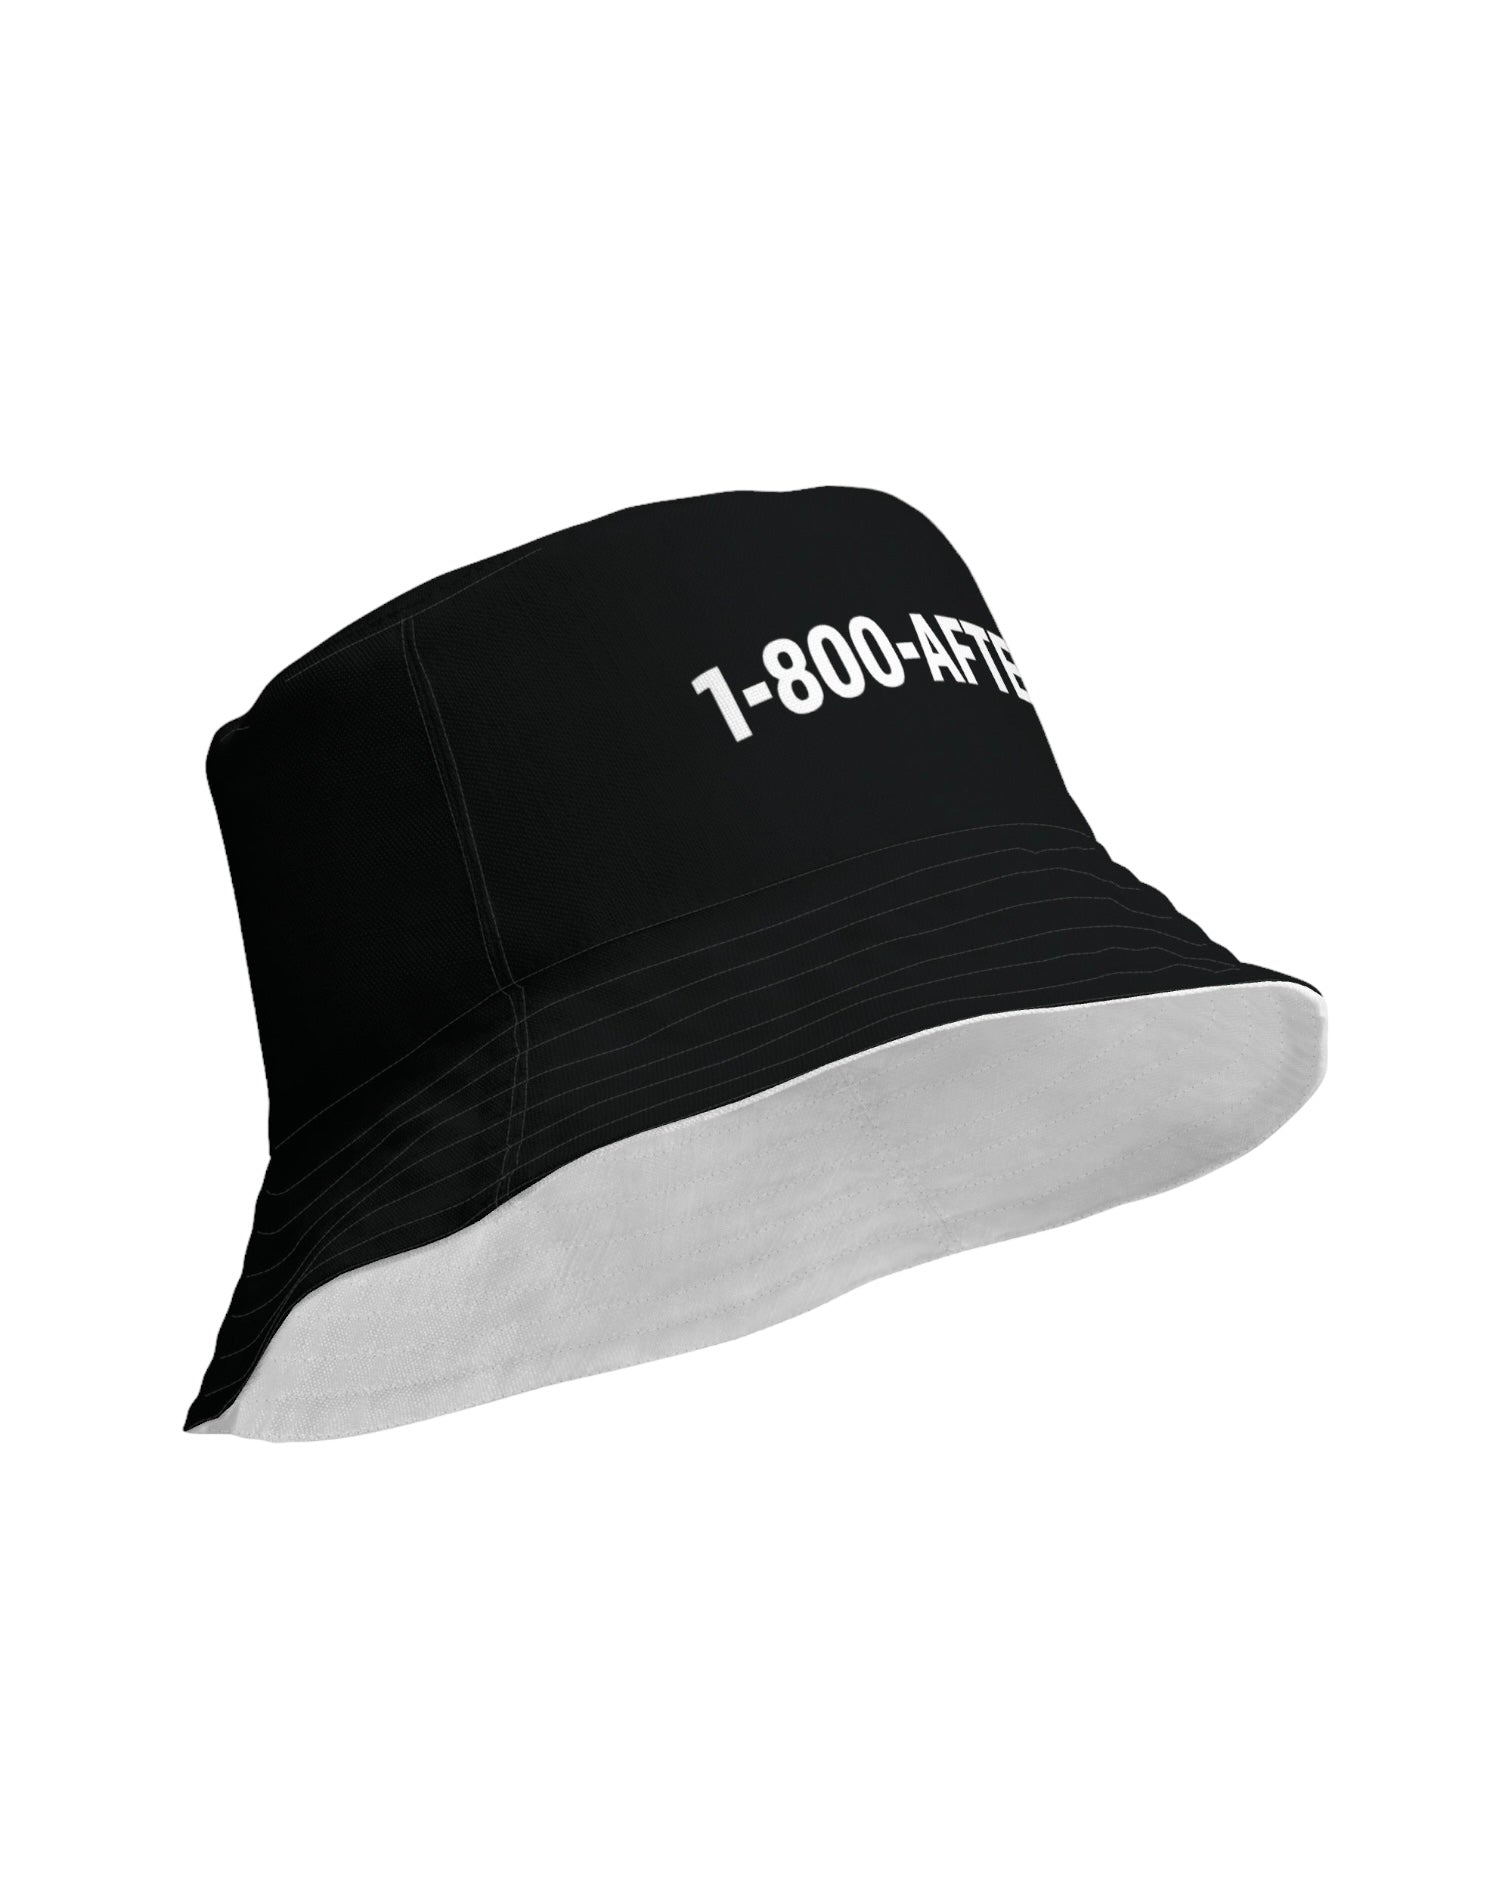 Bottom view of 1-800-Afters Reversible Bucket Hat Black Side